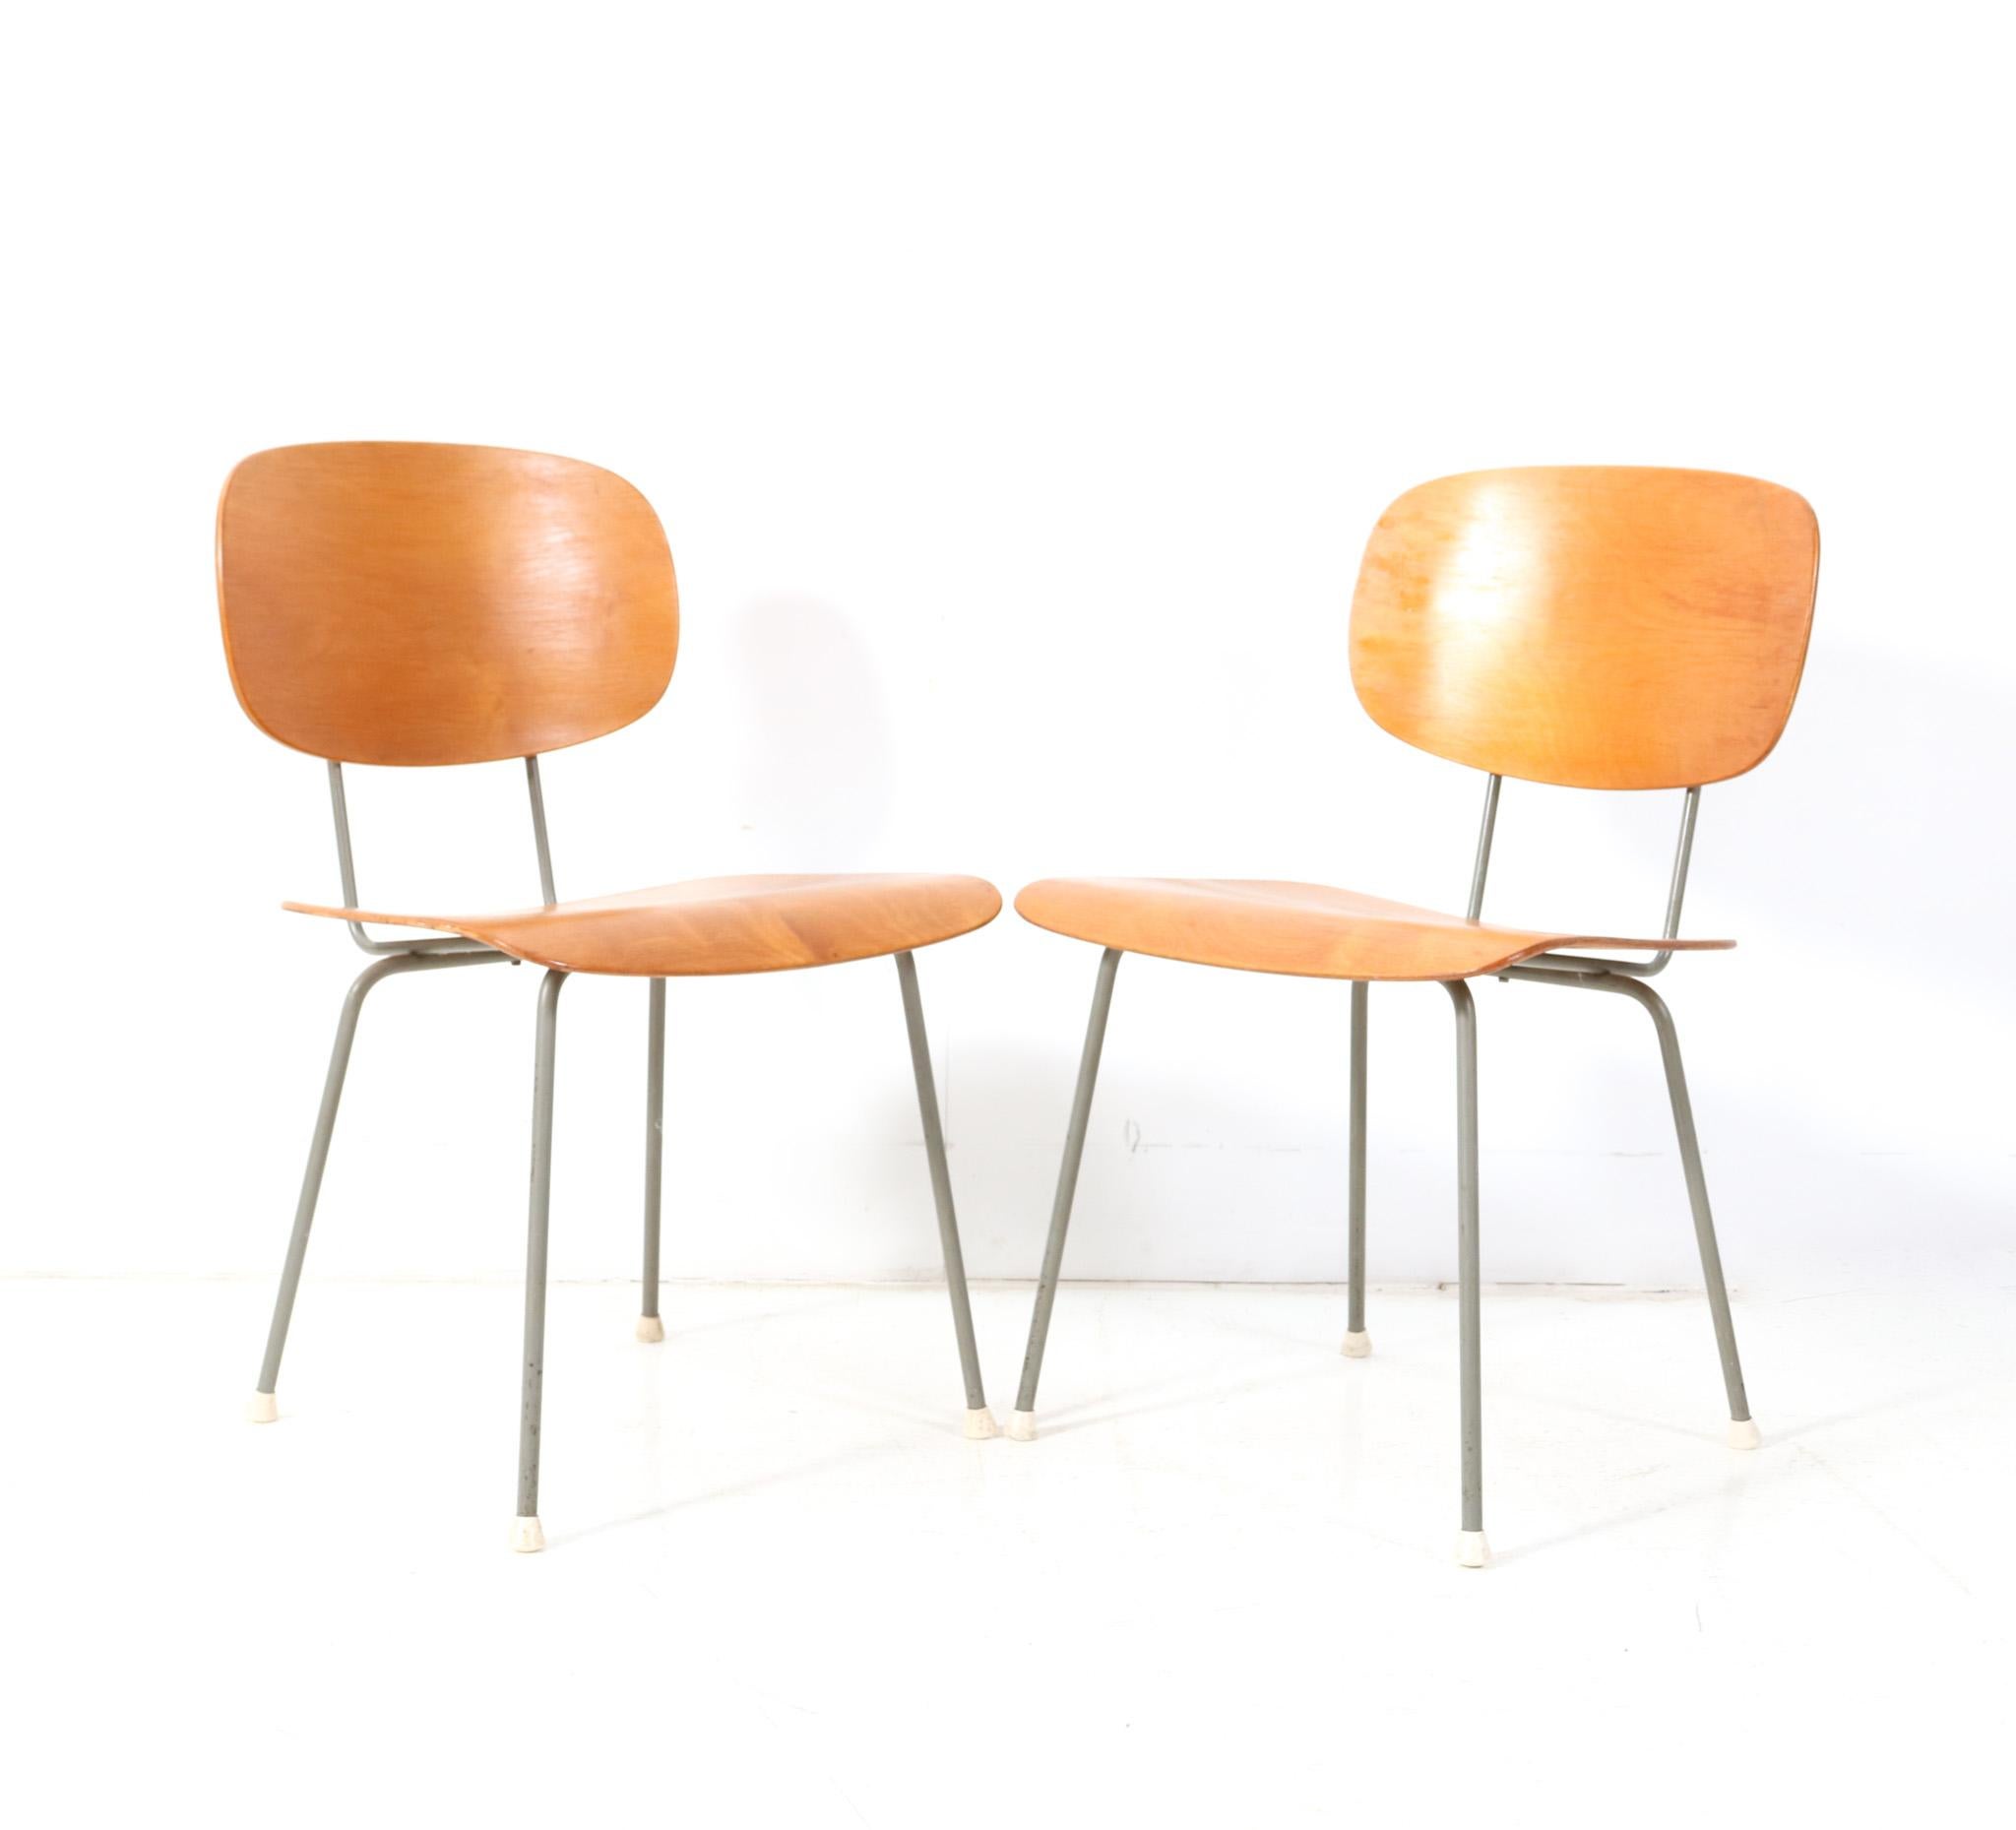 Lacquered Pair of Mid-Century Modern Model 116 Side Chairs by Wim Rietveld for Gispen For Sale